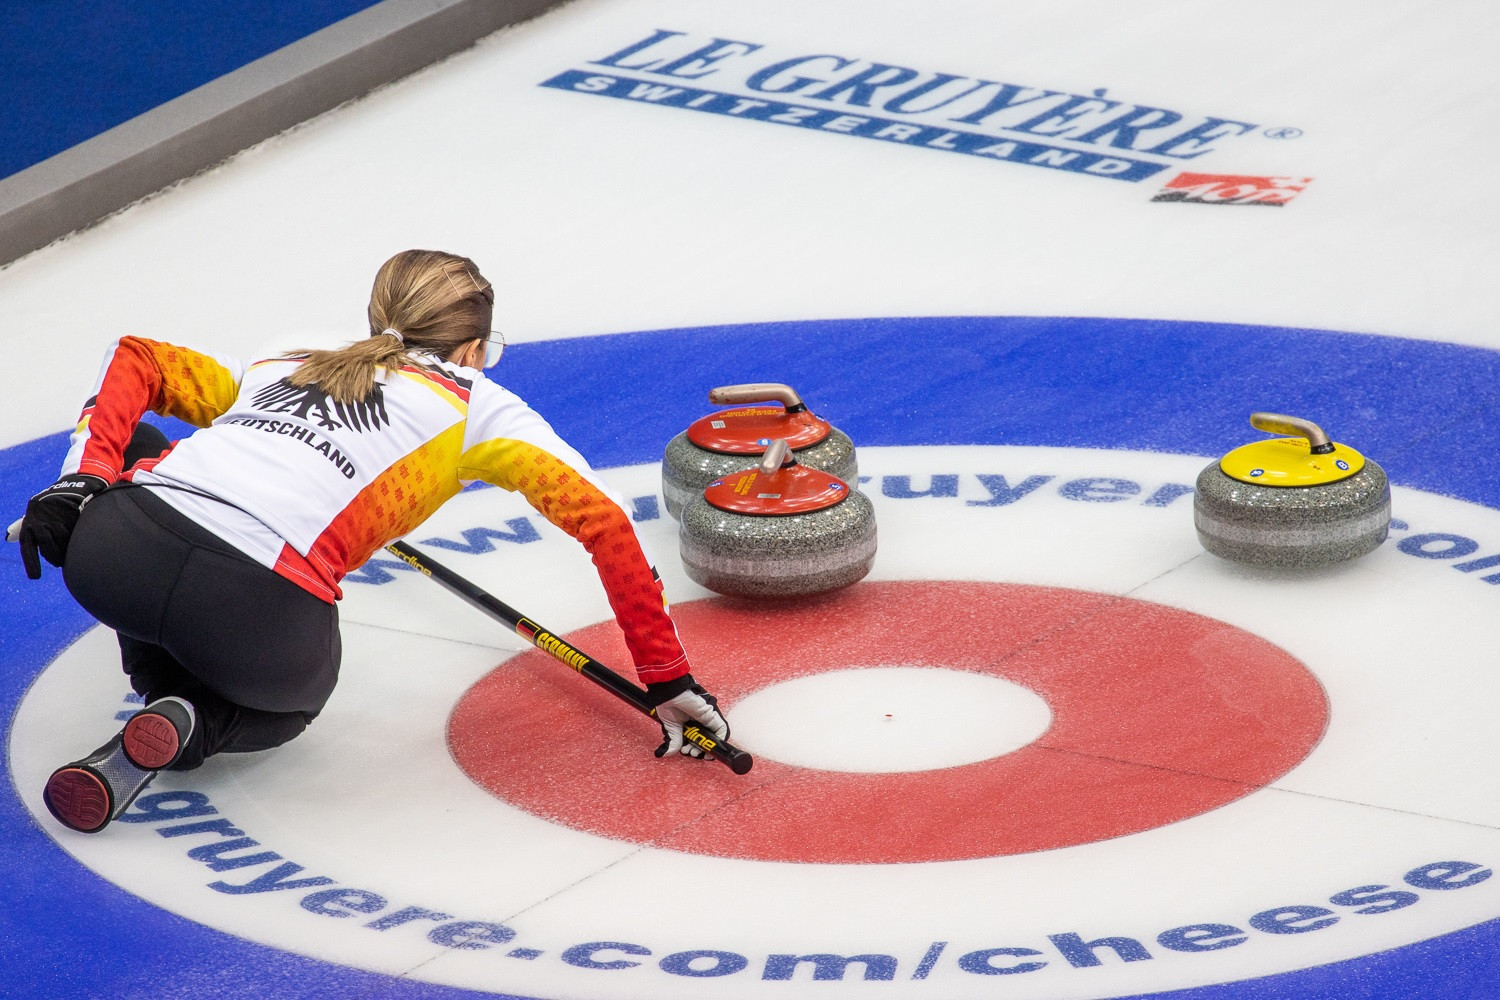 Positive COVID-19 case identified at end of European Curling Championships